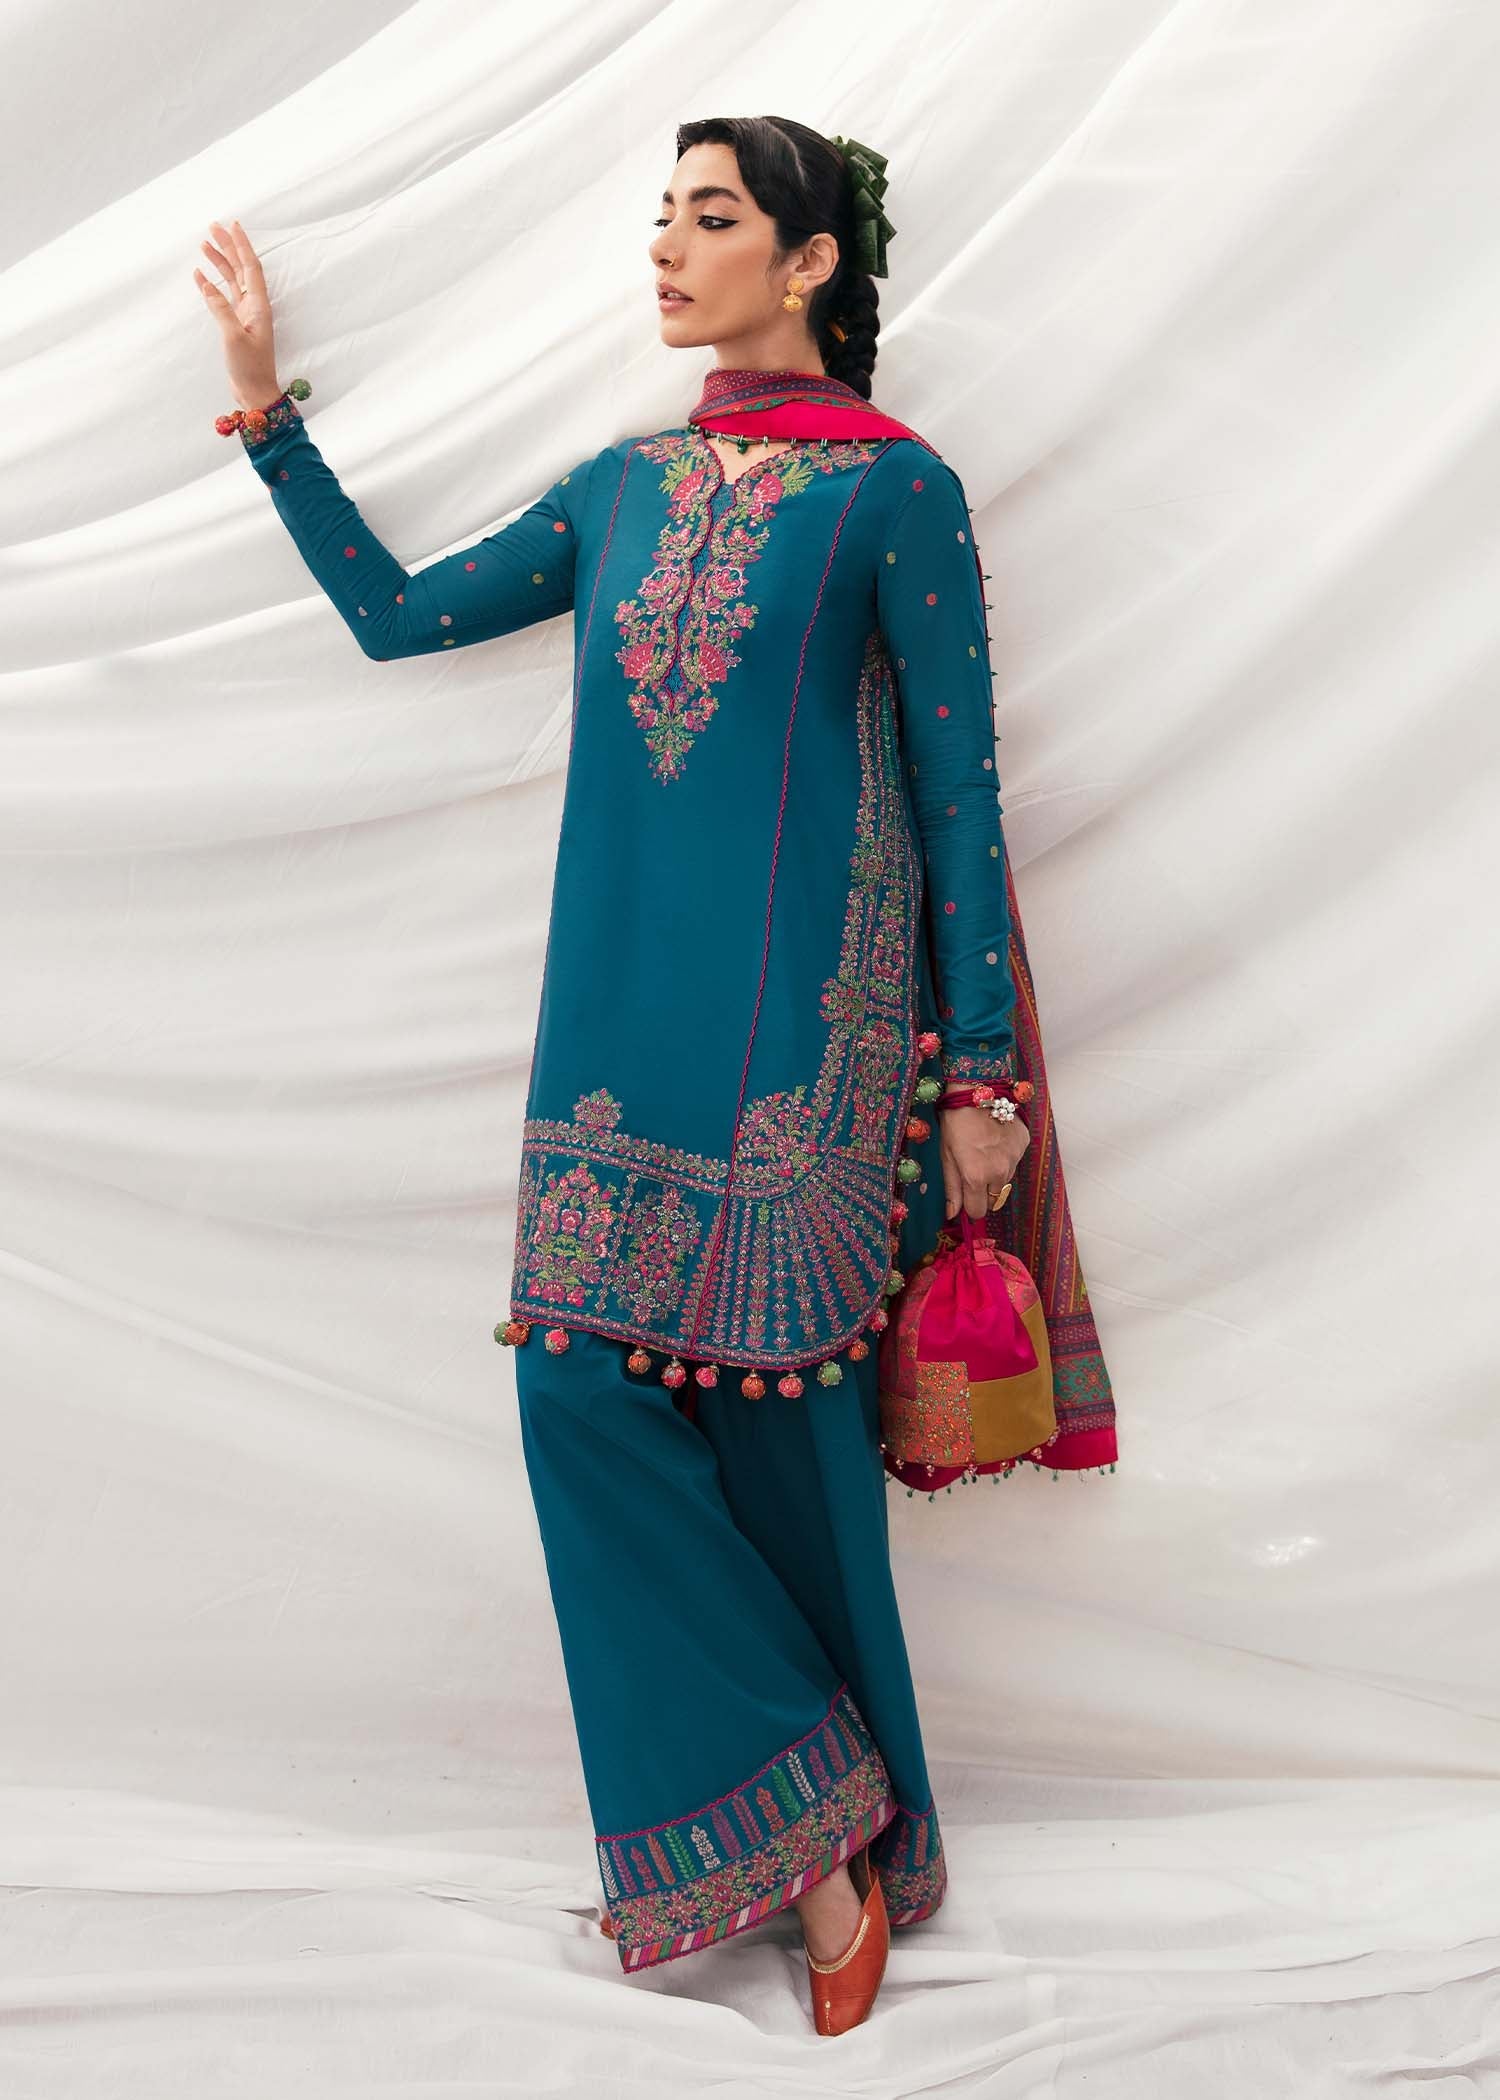 Buy Now - SHAB - Masuam Lawn Collection'23 - Hussain Rehar - Pakistani Designer Clothes - Bridal and Party Dresses - Shahana Collection UK 